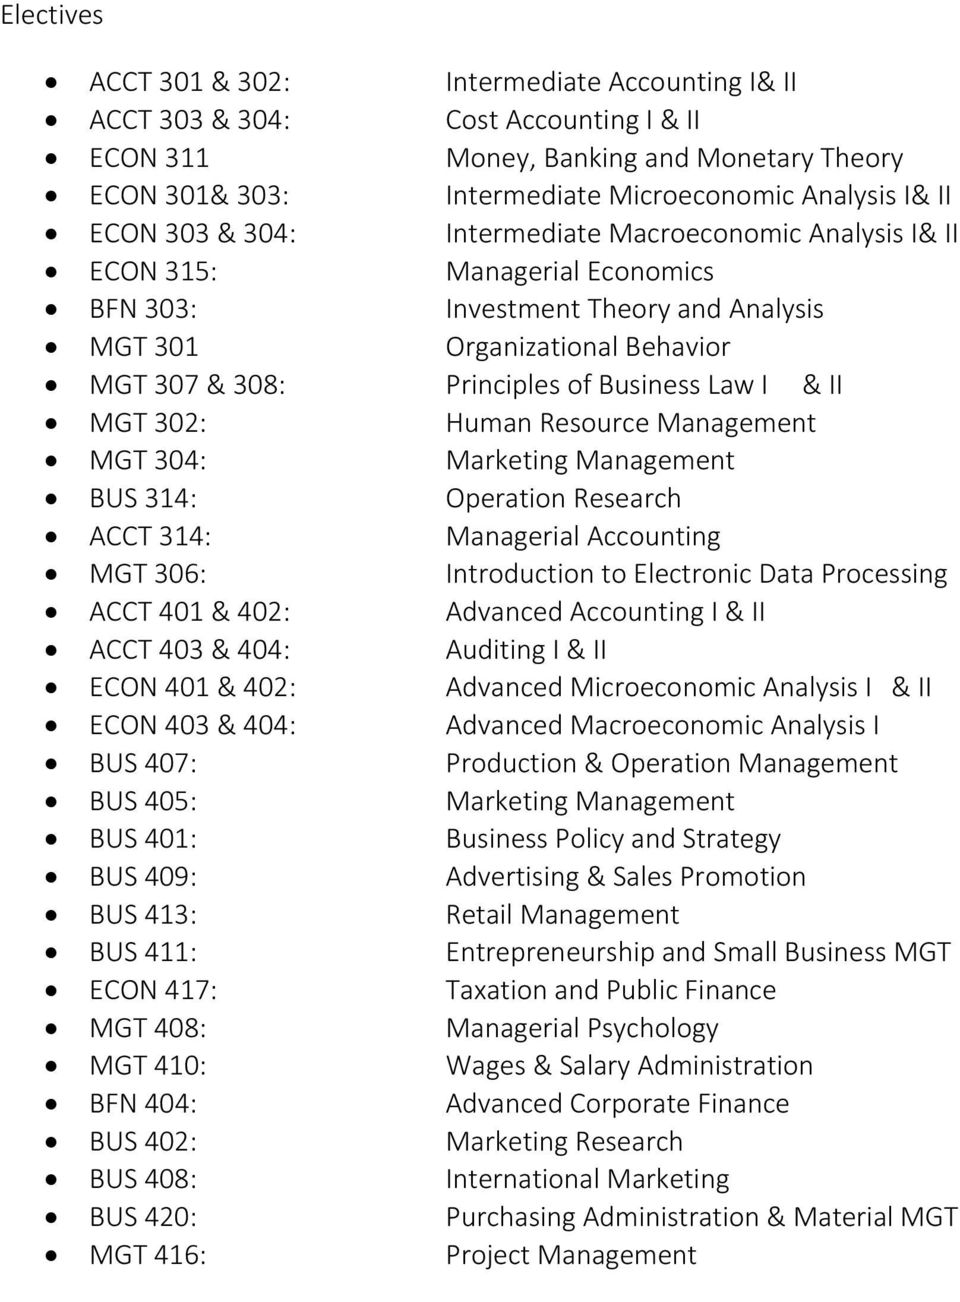 Human Resource Management MGT 04: Marketing Management BUS 14: Operation Research ACCT 14: Managerial Accounting MGT 06: Introduction to Electronic Data Processing ACCT 401 & 402: Advanced Accounting